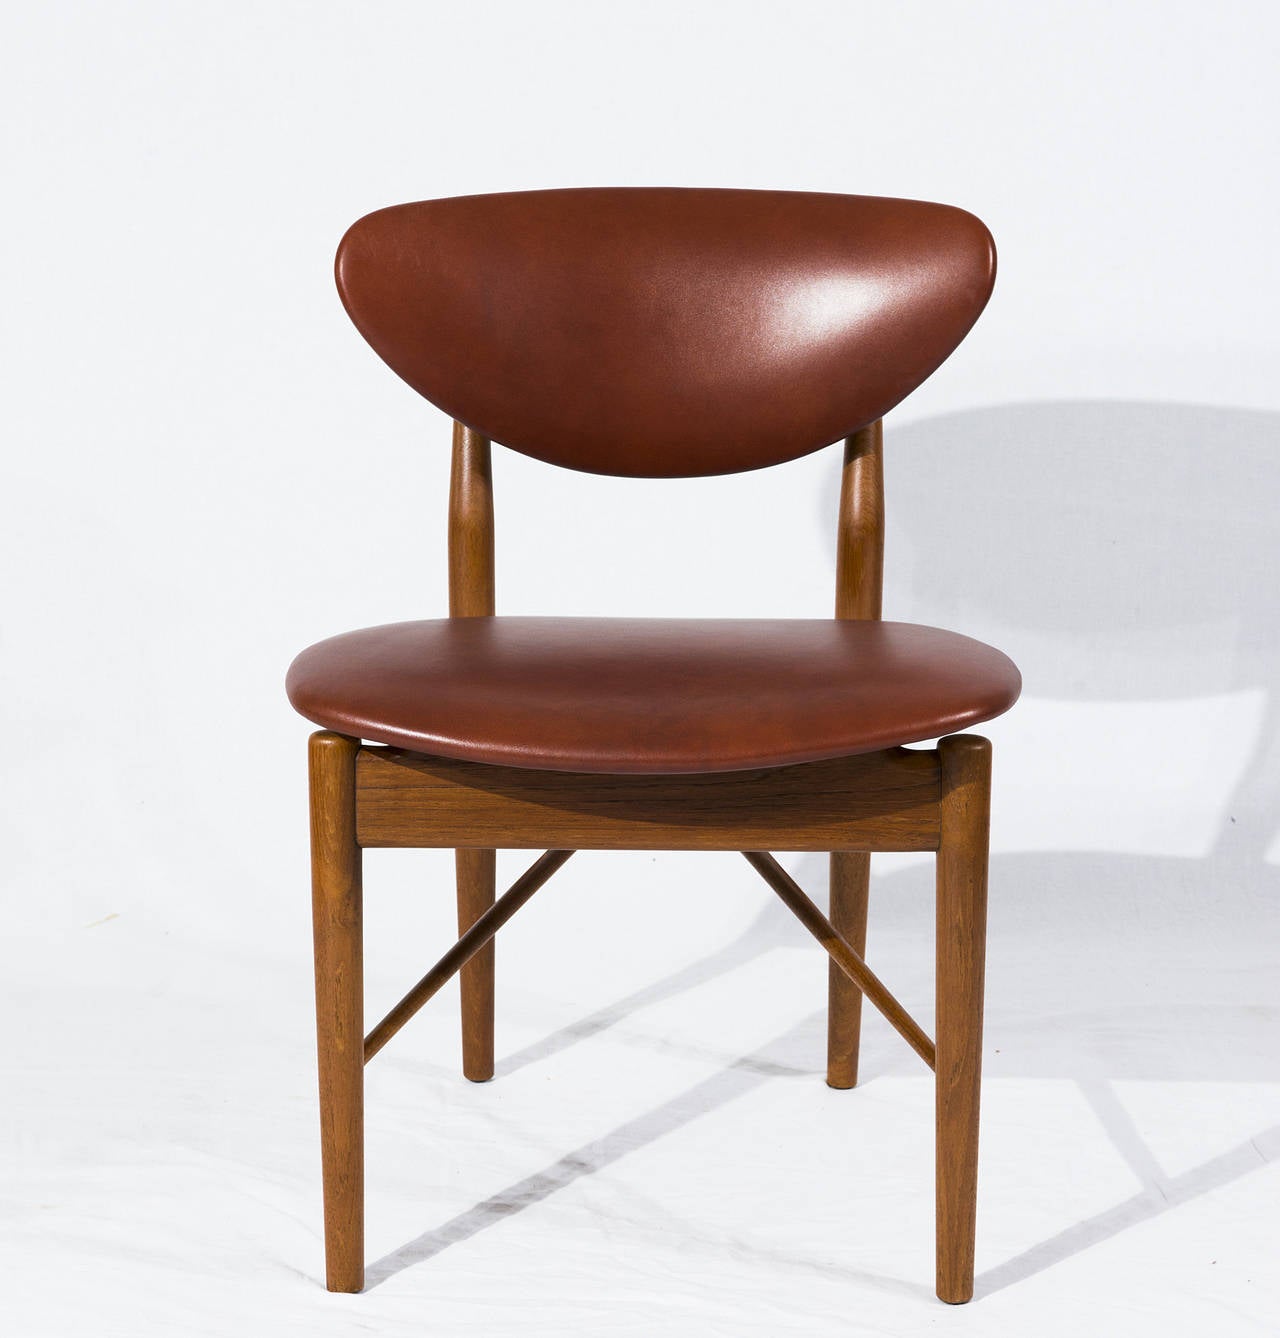 Finn Juhl NV 55 (also known as FJ 55) side chair designed in 1955 and produced by Niels Vodder. Chair is signed Niels Vodder.  Store formerly known as ARTFUL DODGER INC